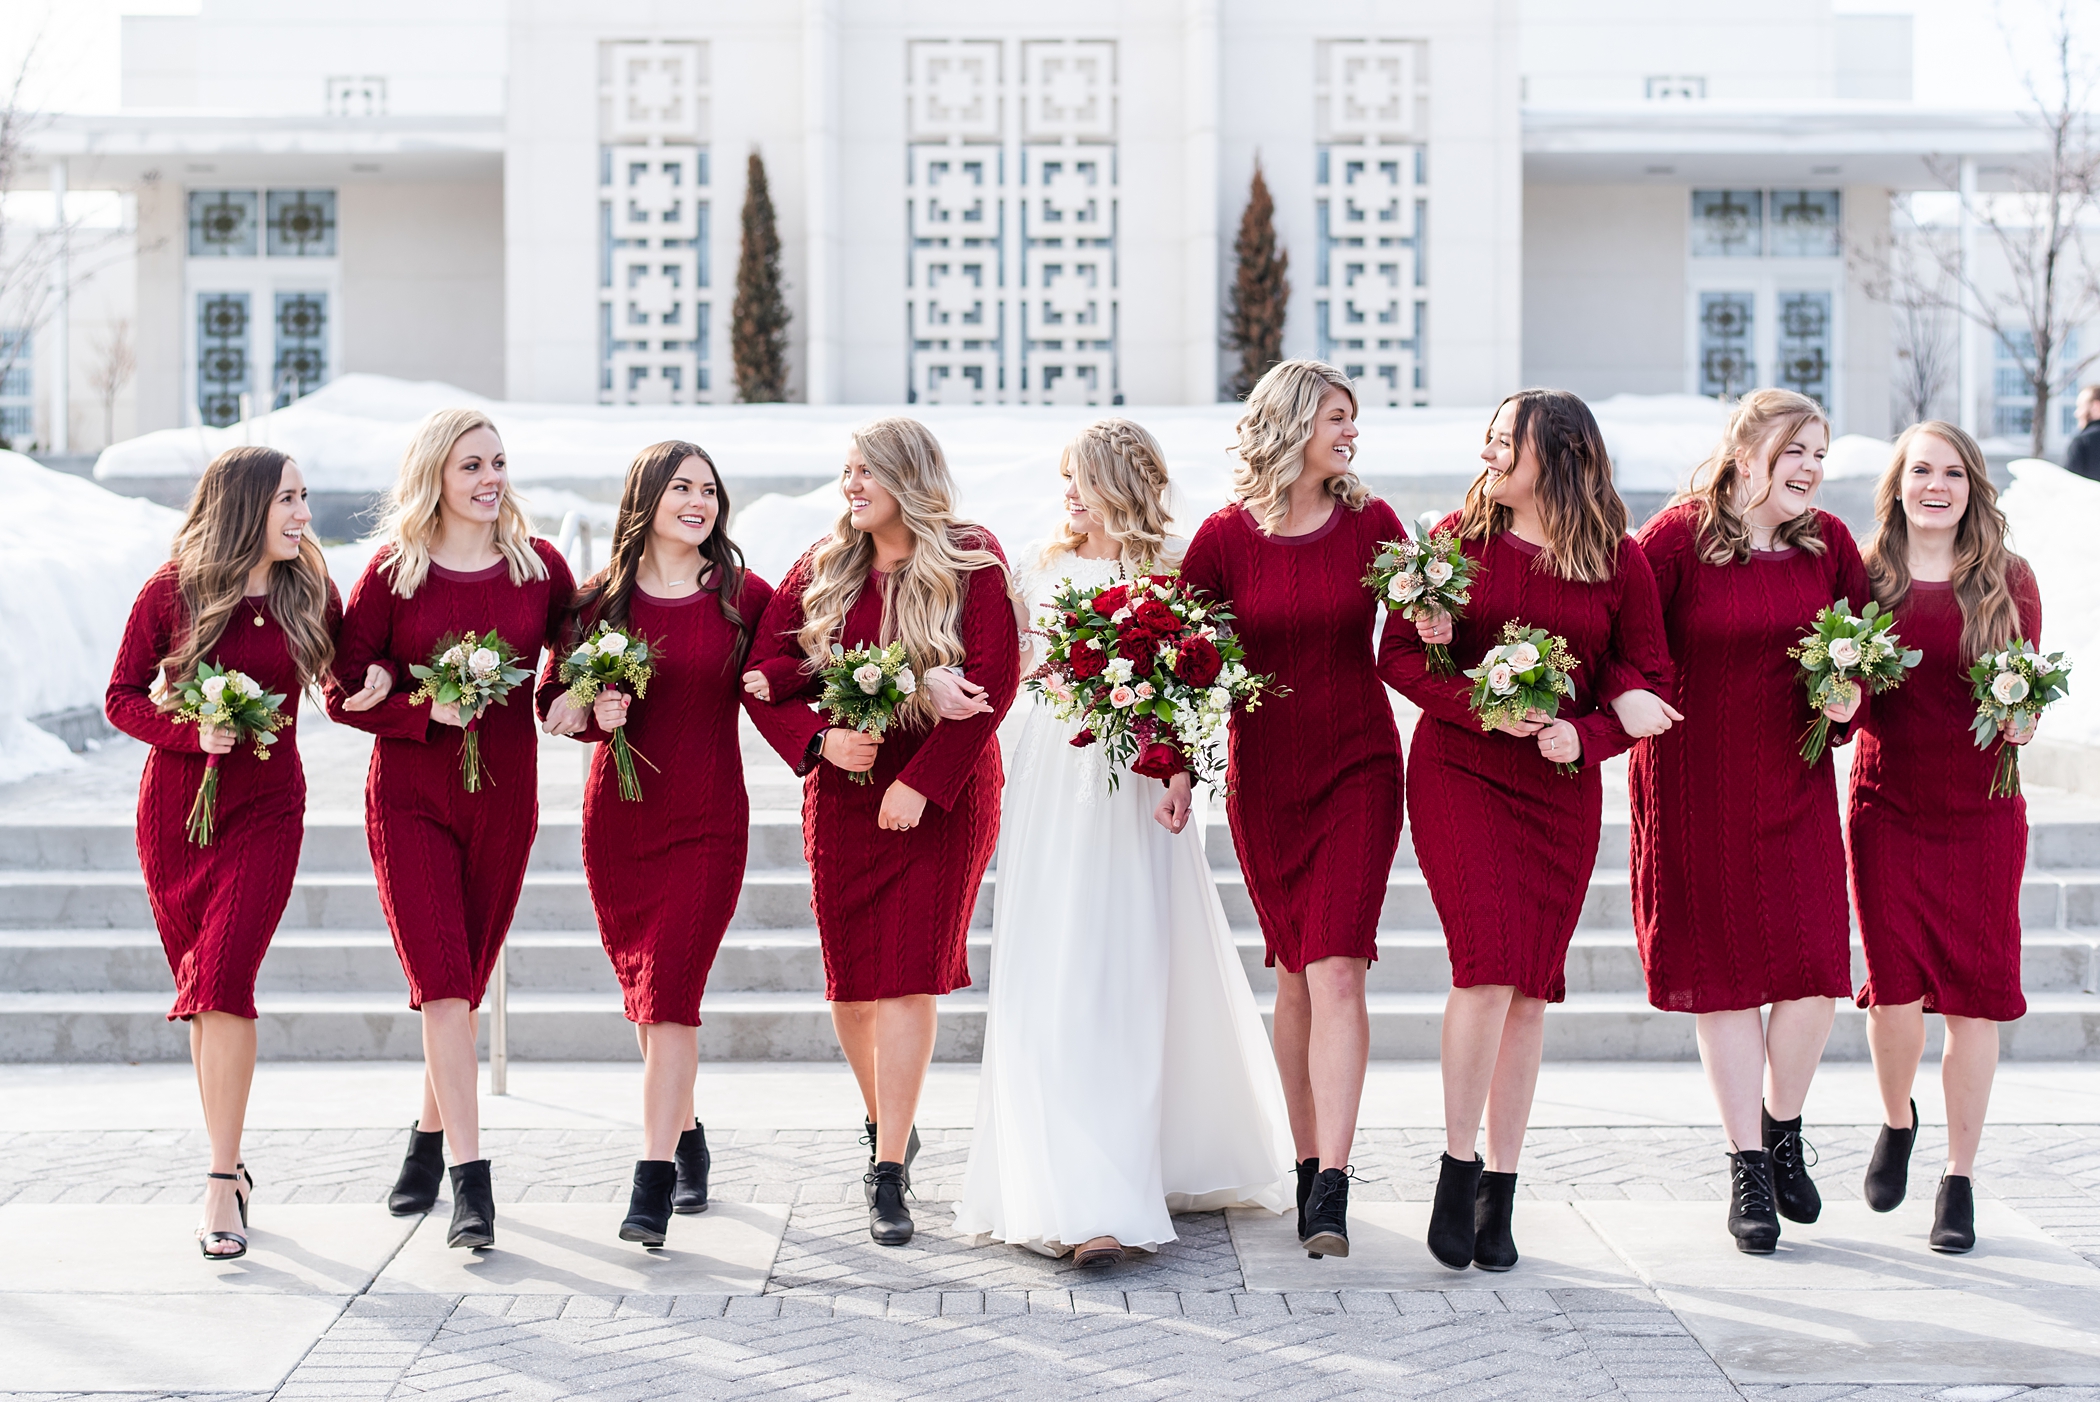 Bridal party in winter colors- burgundy